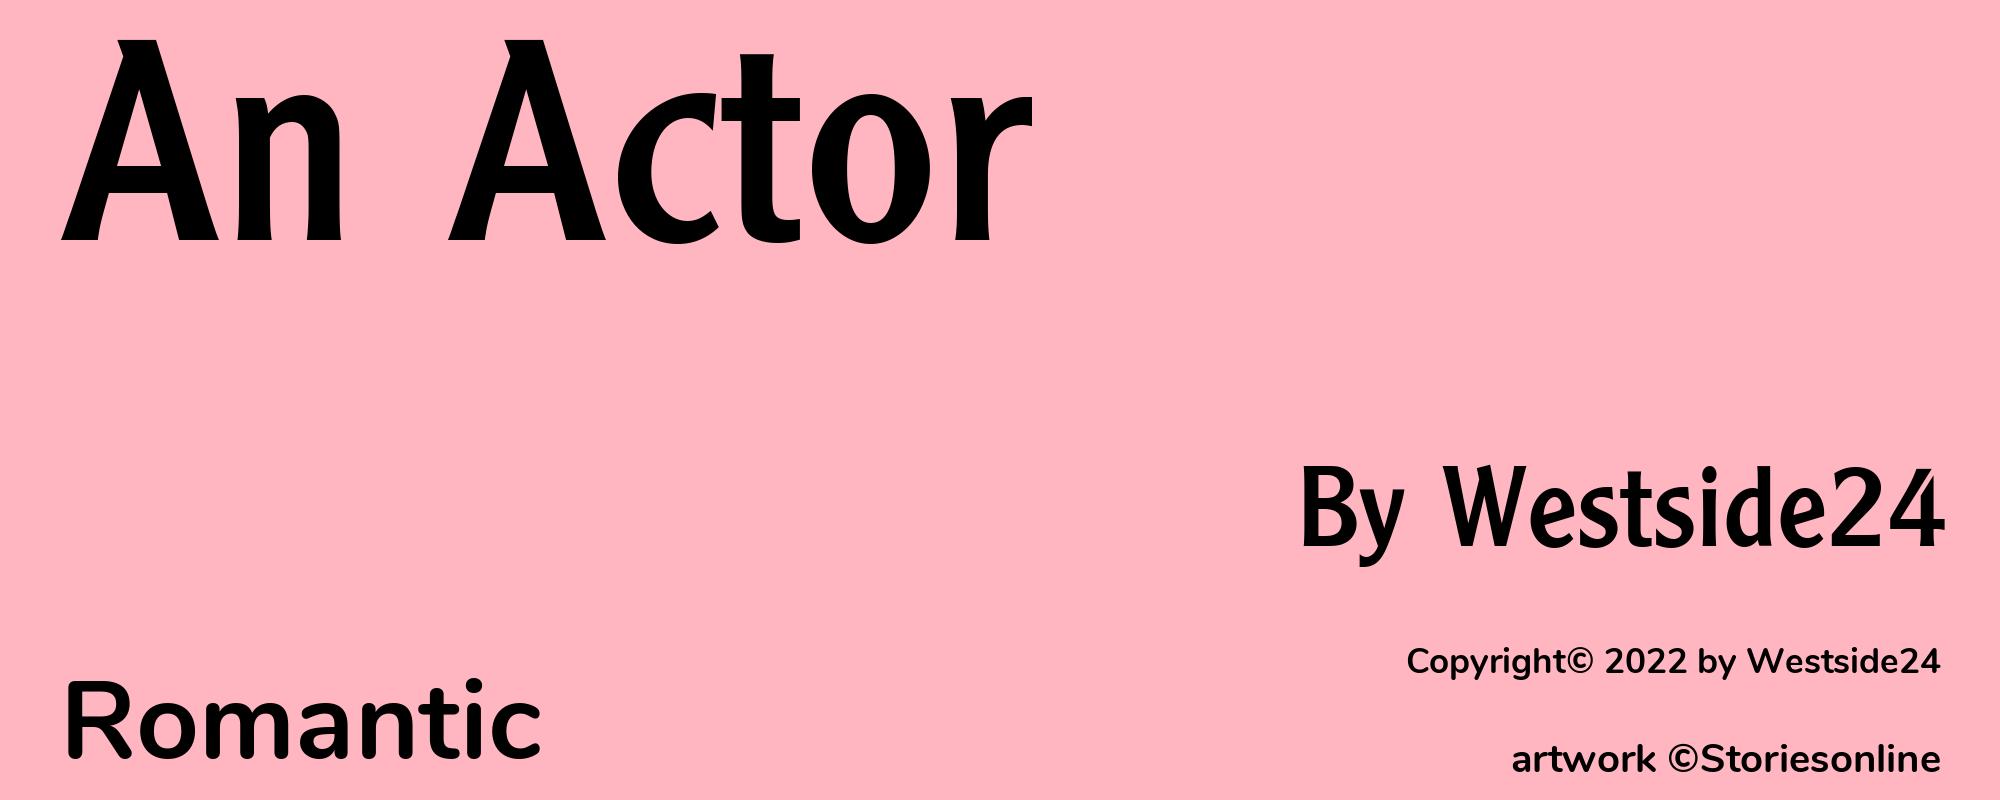 An Actor - Cover